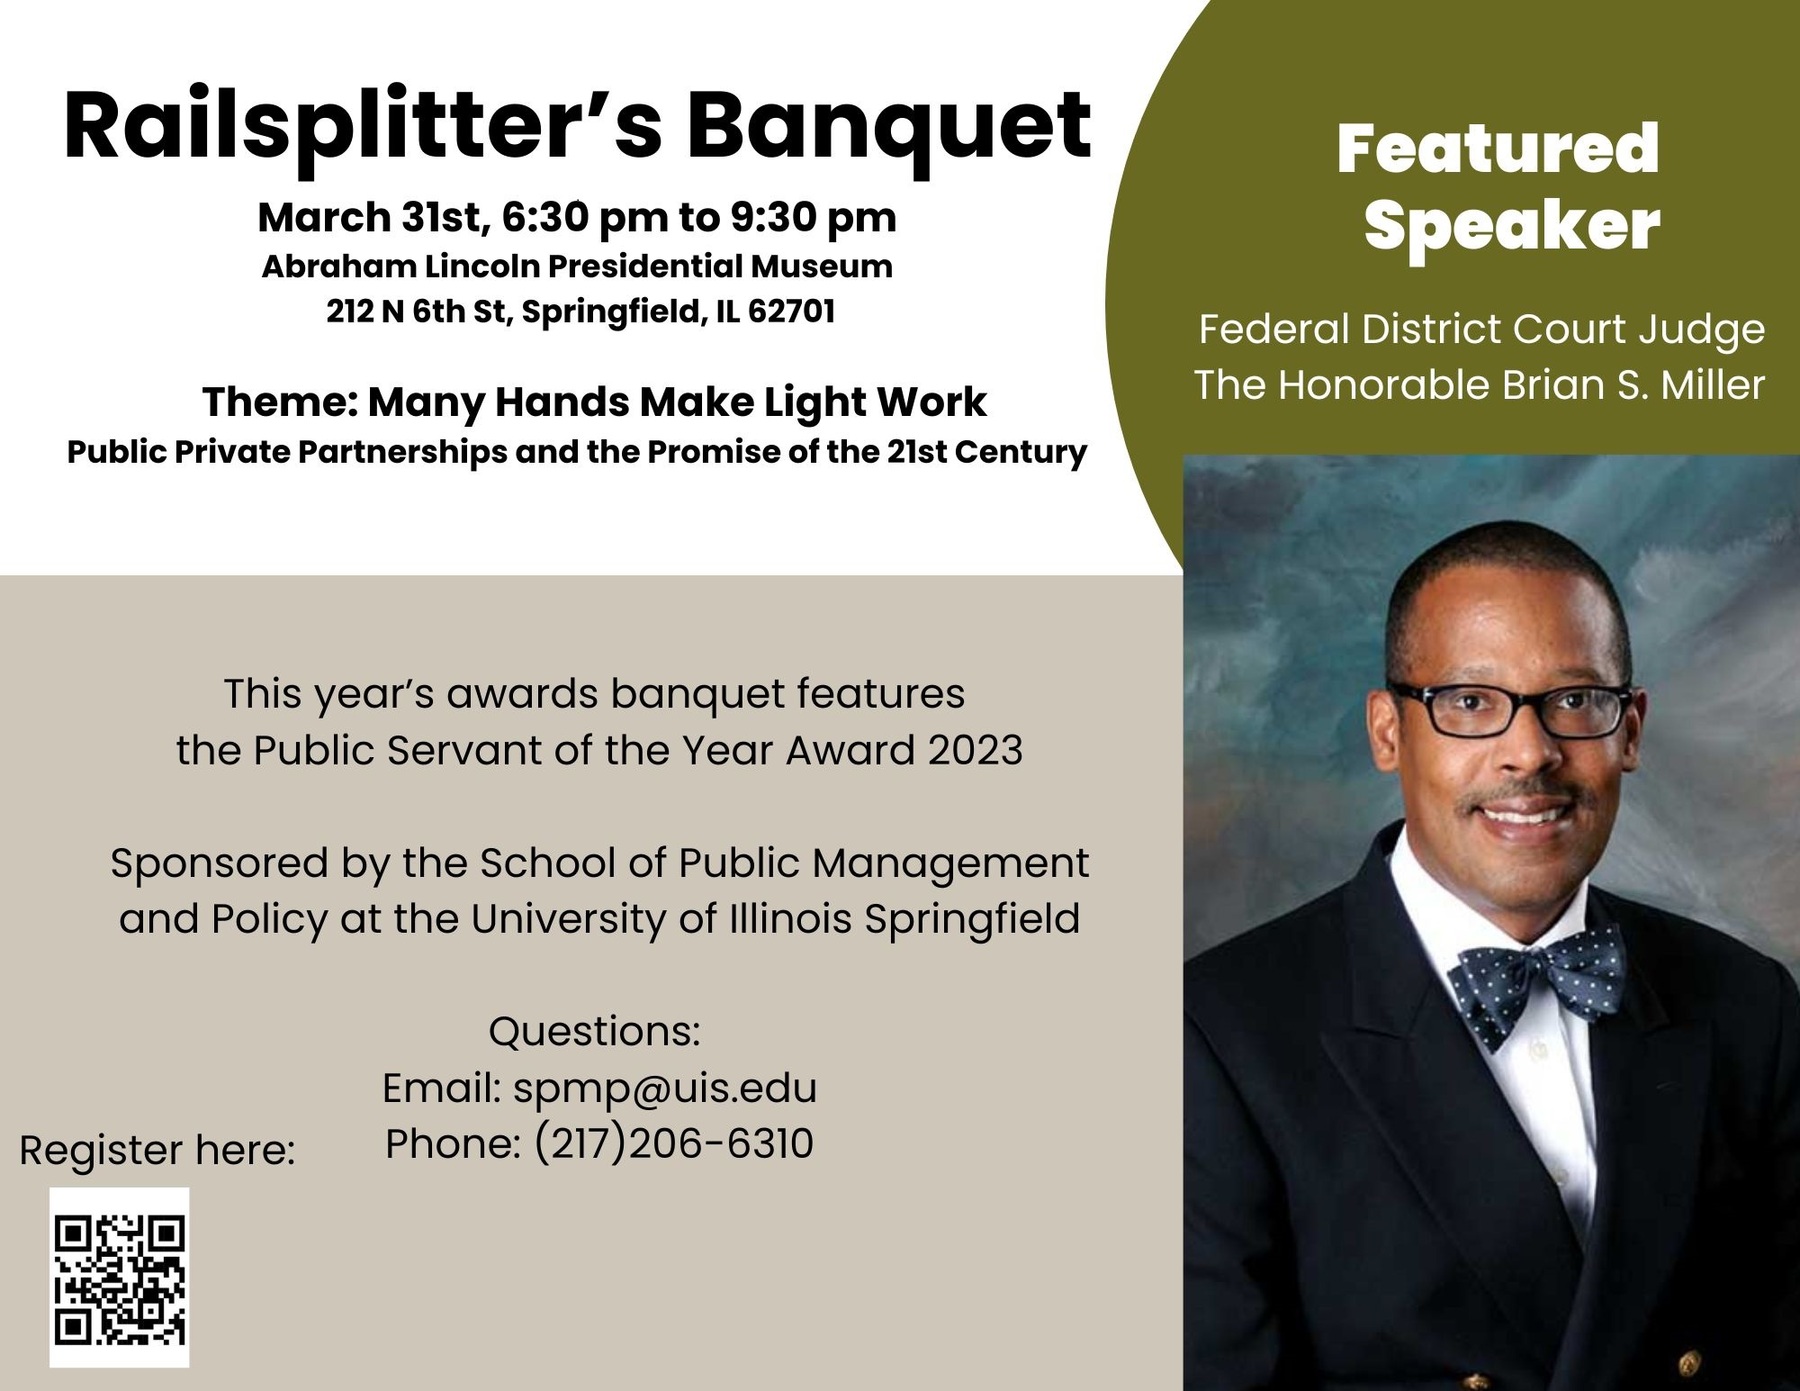 Invitation to the Railsplitters Banquest.  Email spmp@uis.edu for information.